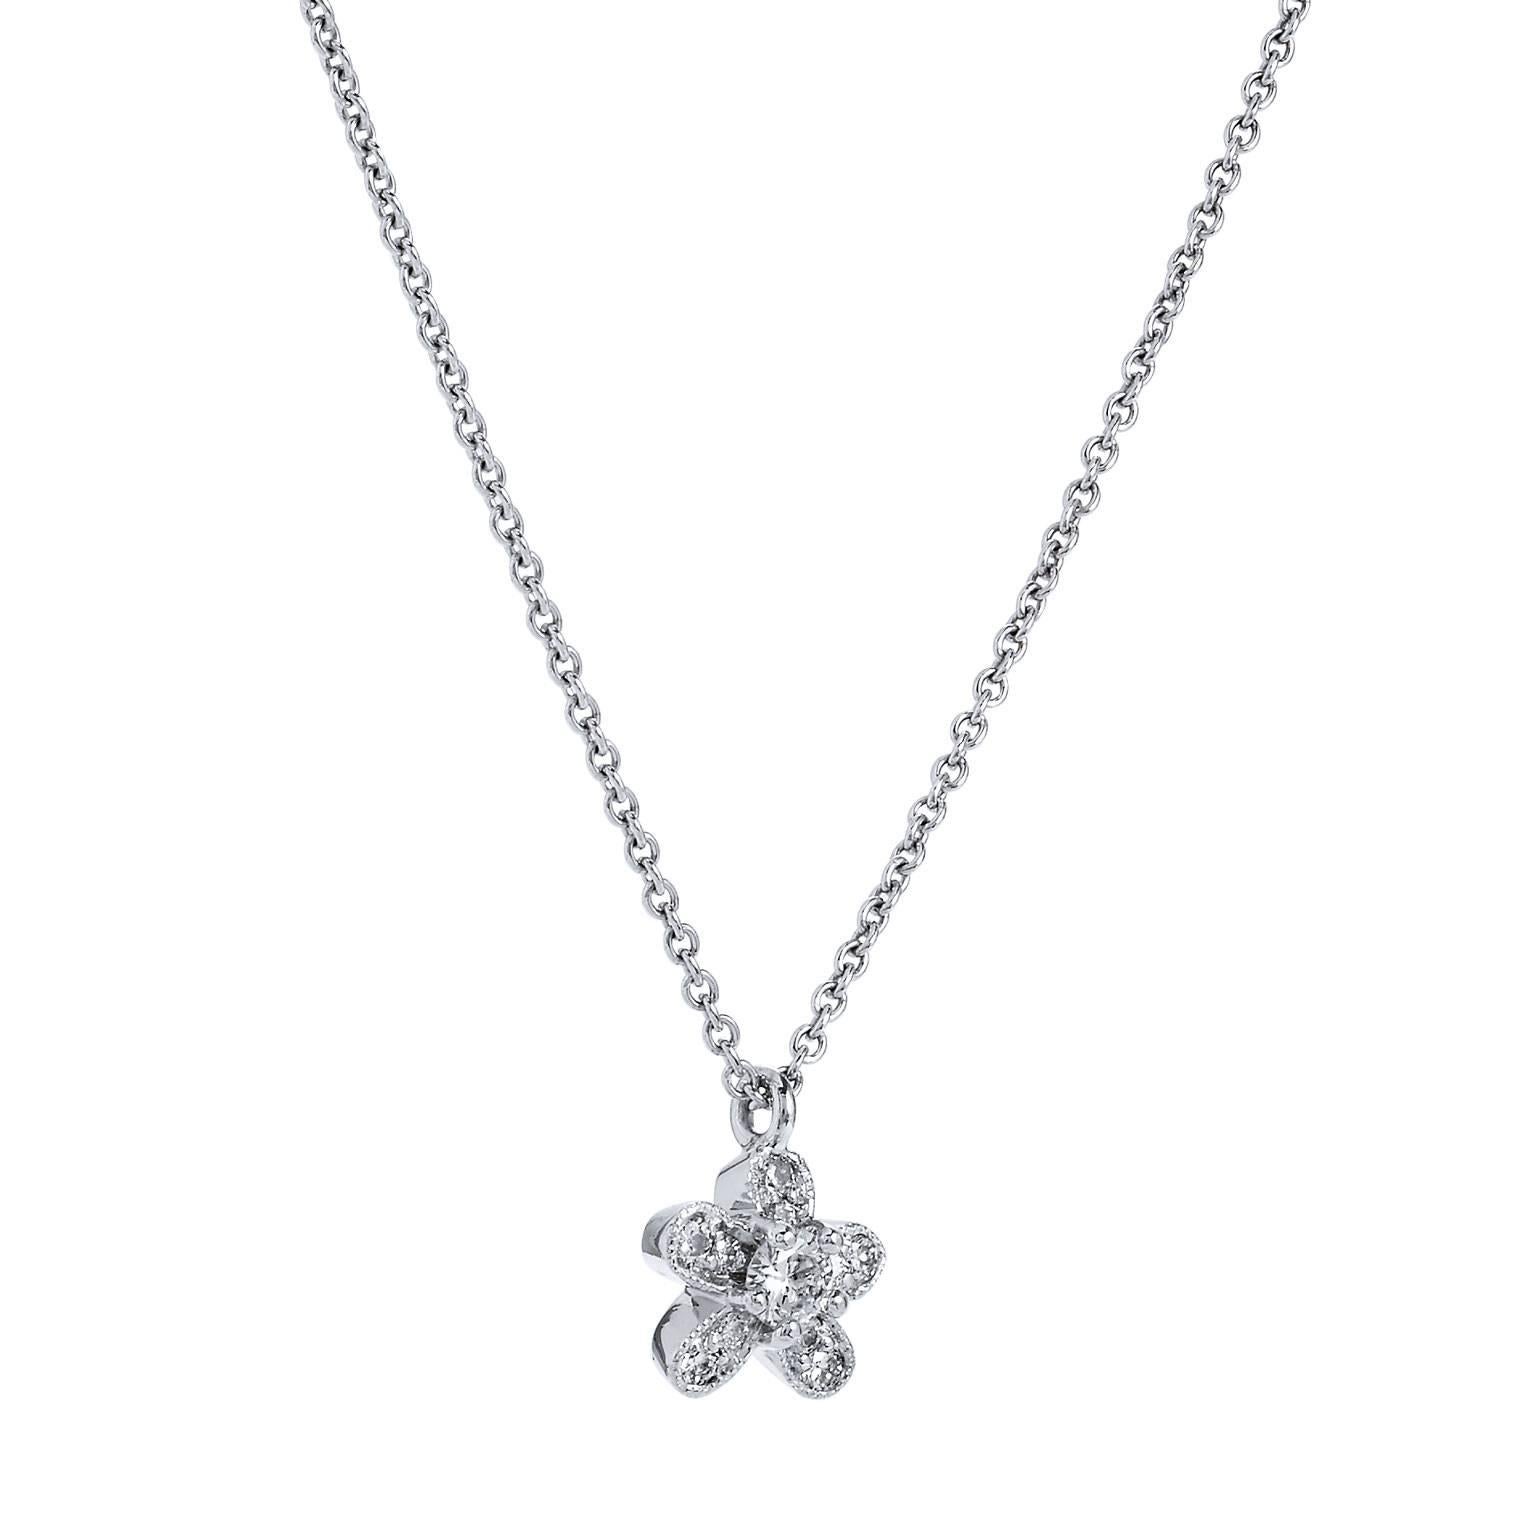 This sweet and simple H and H original design features platinum fashioned in the shape of a five petal flower.  0.24 carat of diamond pave set with milgrain work along the perimeter, exude a fun and playful energy in this darling flower charm